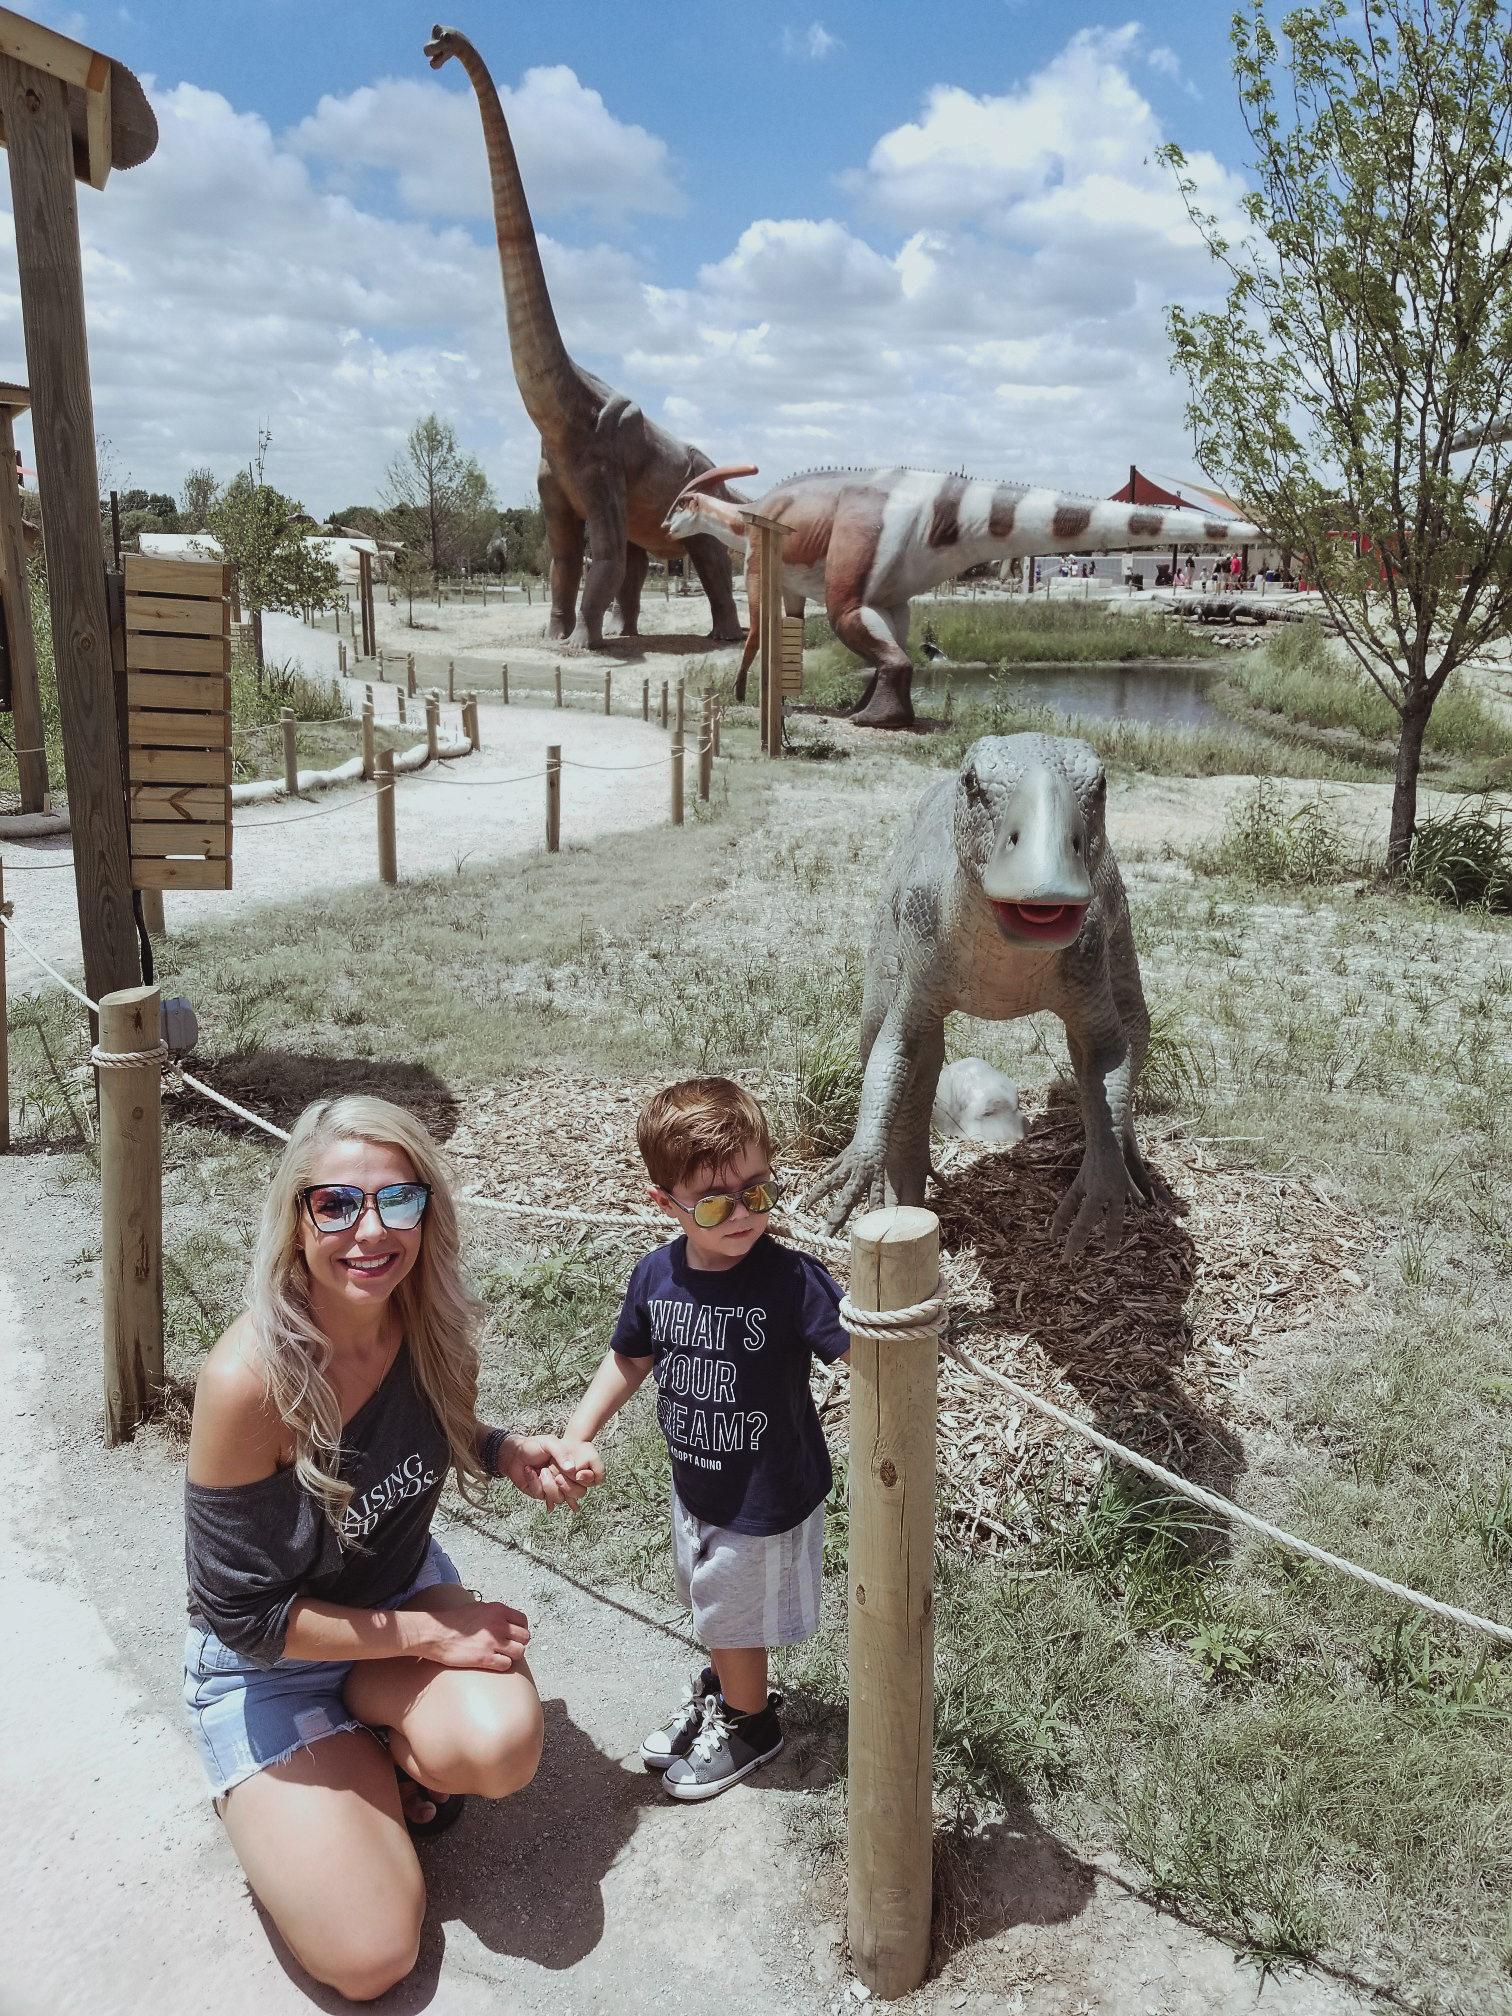 This place looks amazing! Field Station Dinosaurs is perfect if you're looking for family activities in Wichita, KS. This dinosaur park is one of the most popular kid-friendly activities in Derby, Kansas. Here's a real mom's review of Field Station Dinosaurs, so you can decide if it's worth the trip for your family.